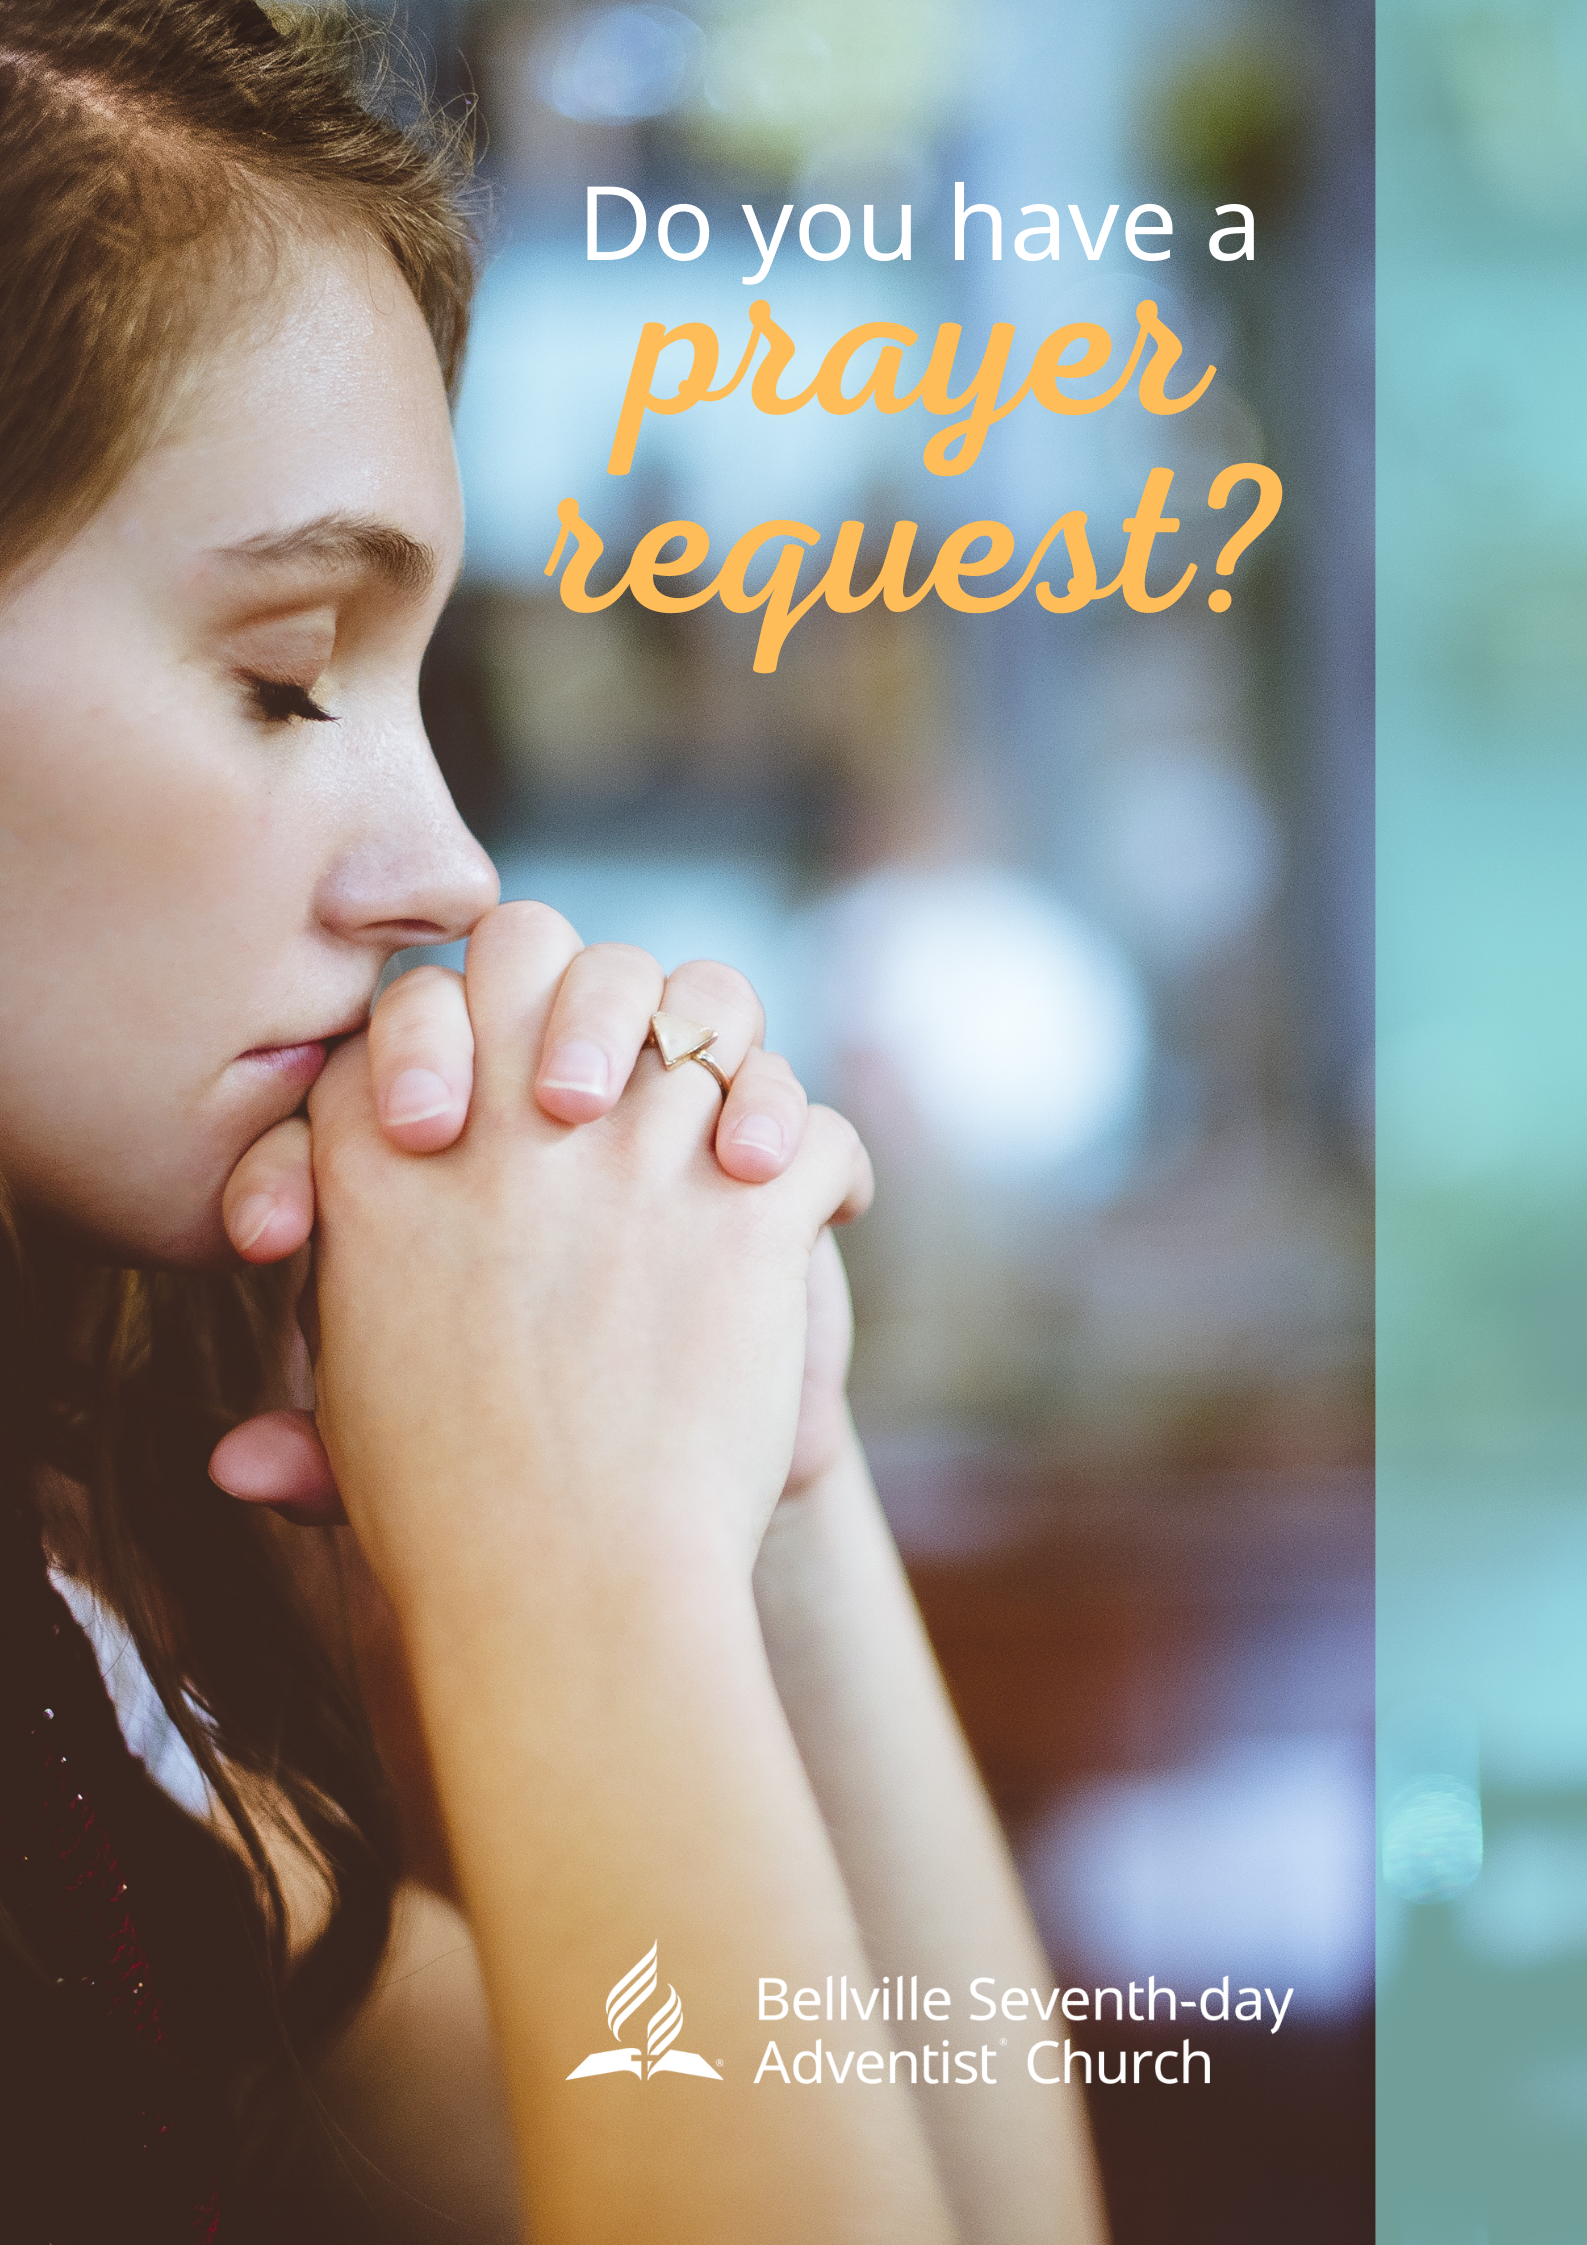 Click here to submit a prayer request